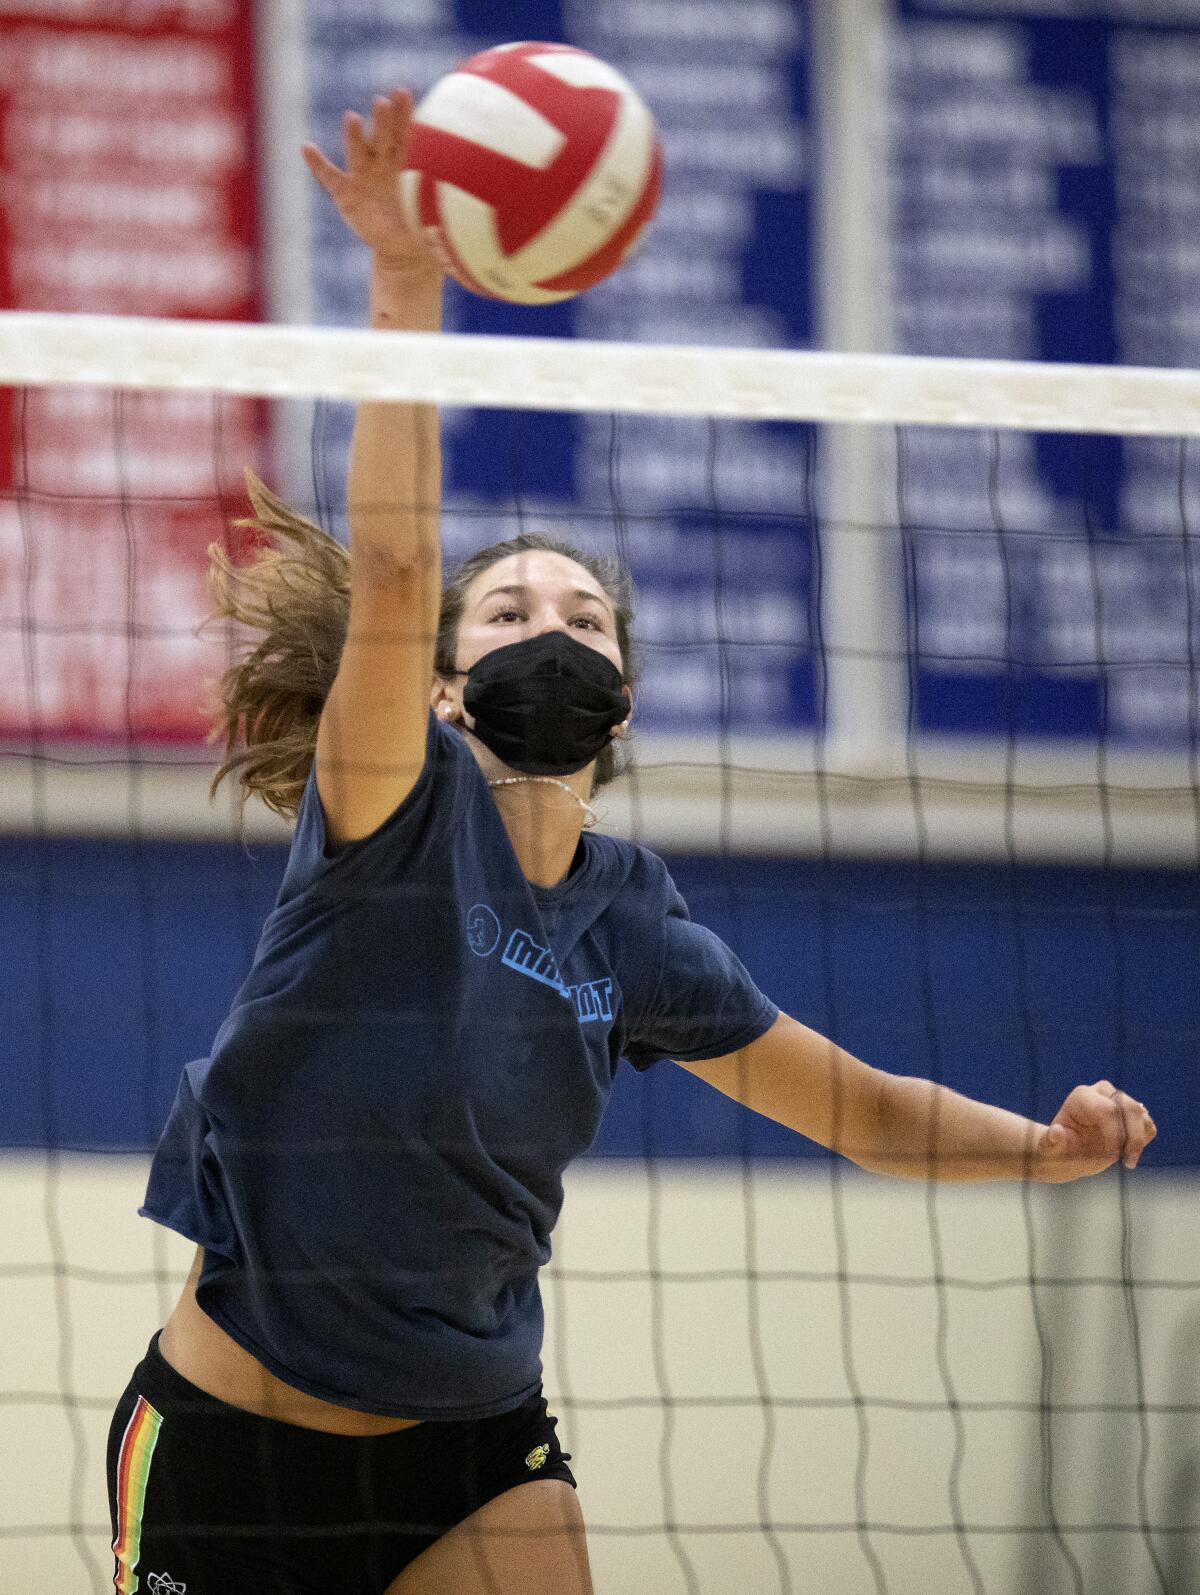 LOS ANGELES, CA - JULY 25: Elia Rubin is a standout volleyball player at Marymount High School in Los Angeles. 